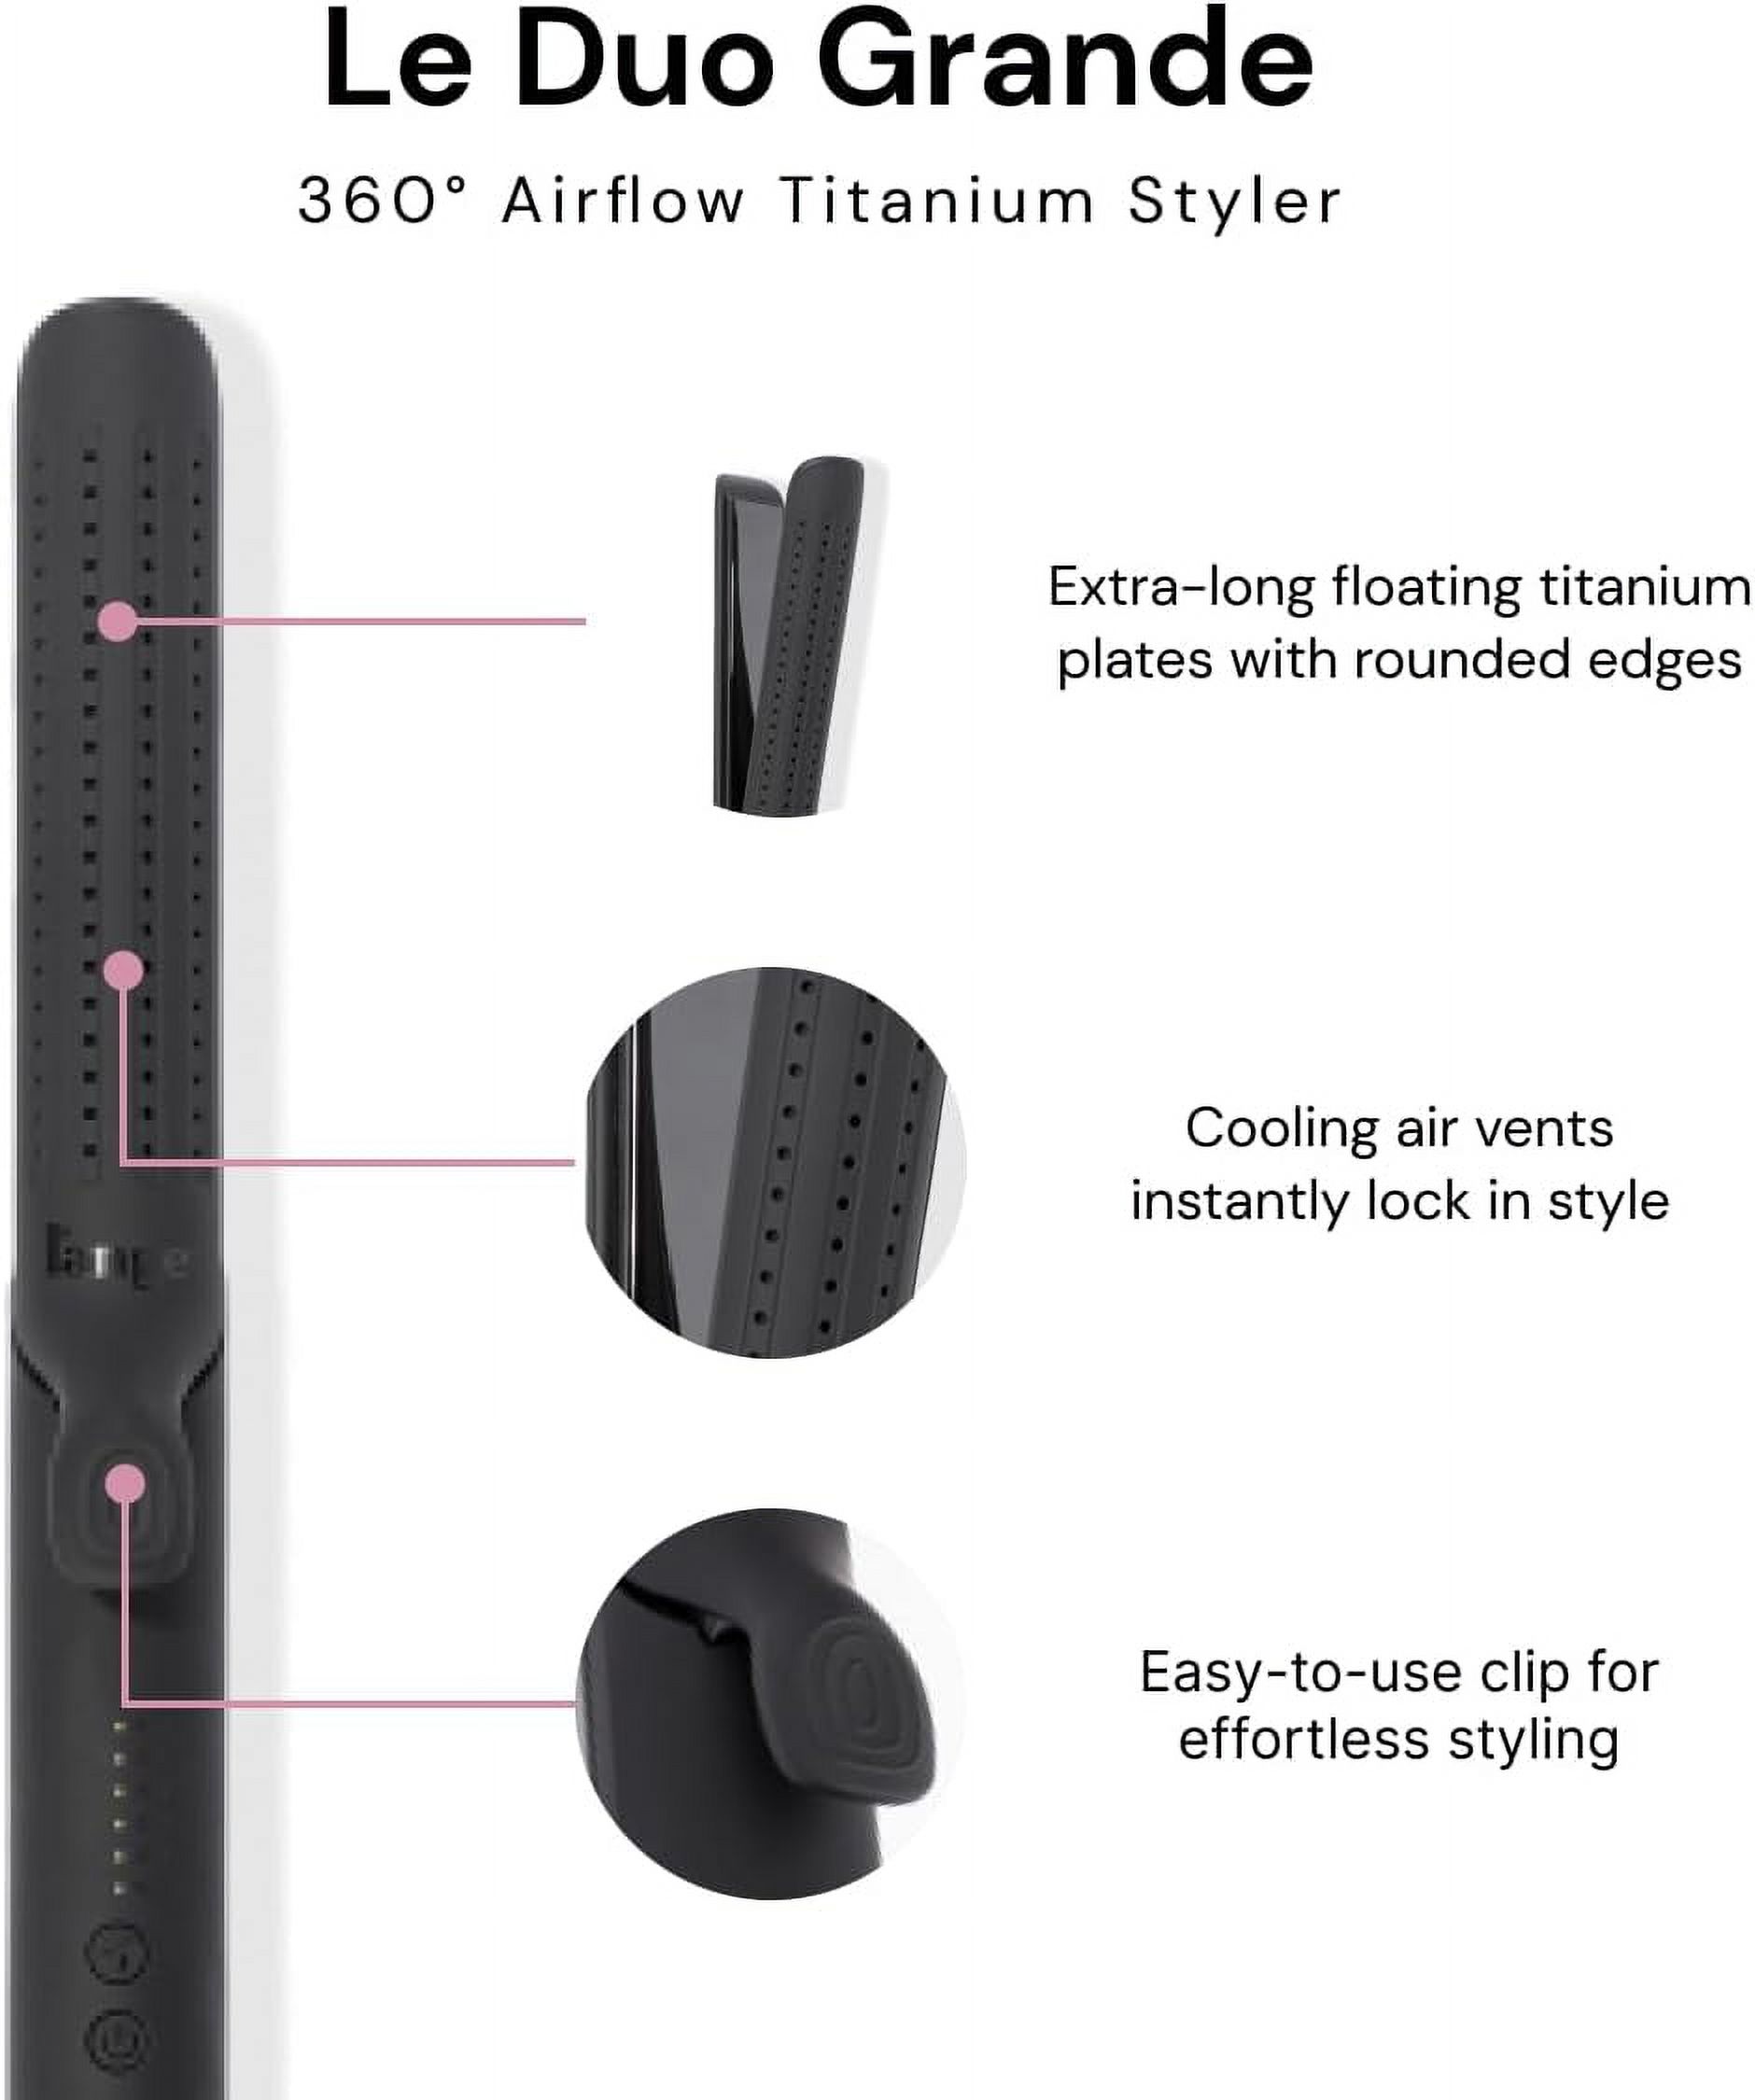 L'ange Hair Le Duo Grande 360° Airflow Styler | 2-in-1 Curling Wand & Titanium Flat Iron Hair Straightener - image 4 of 9